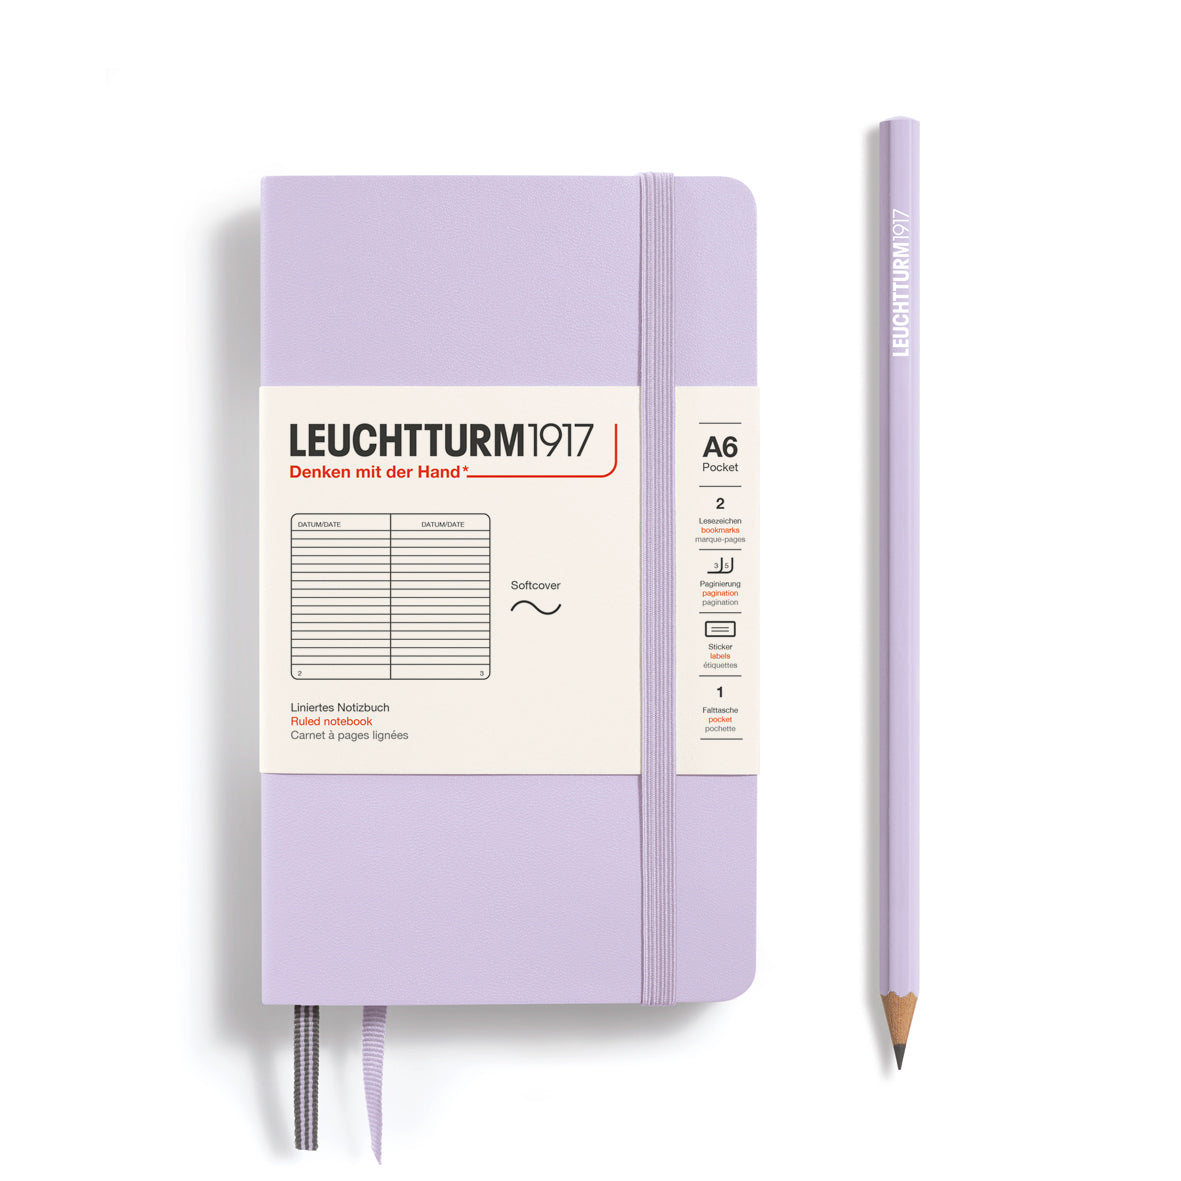 Leuchtturm1917 Softcover Pocket Notebook A6 Ruled, Lilac - Blesket Canada